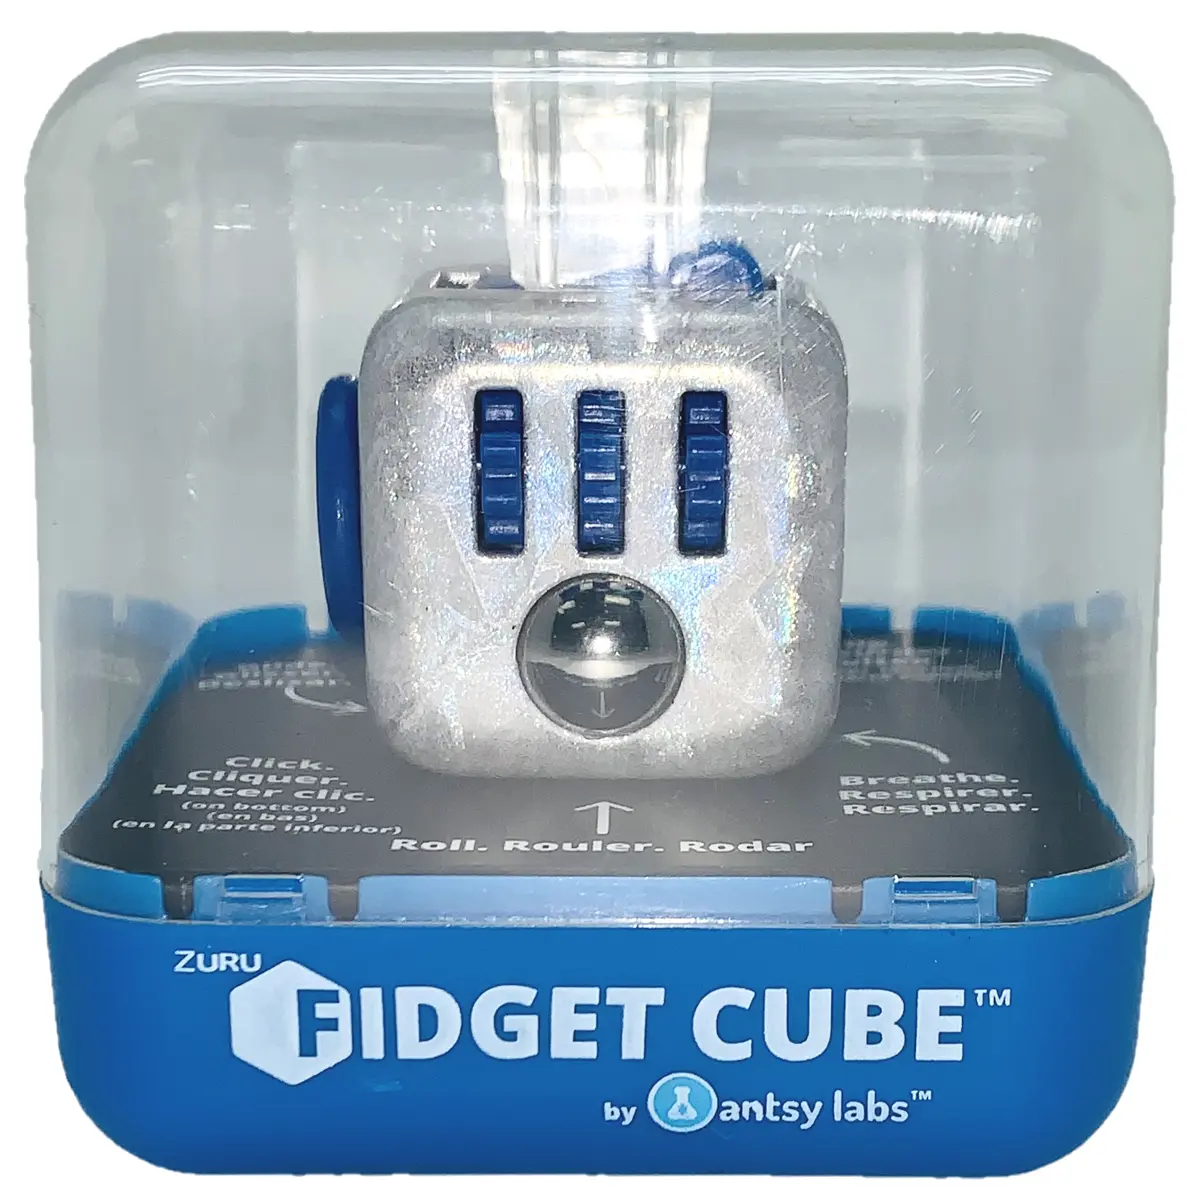 Zuru Fidget Cube by Antsy Labs Hologram Therapuetic Relax Series 3 Silver  Blue